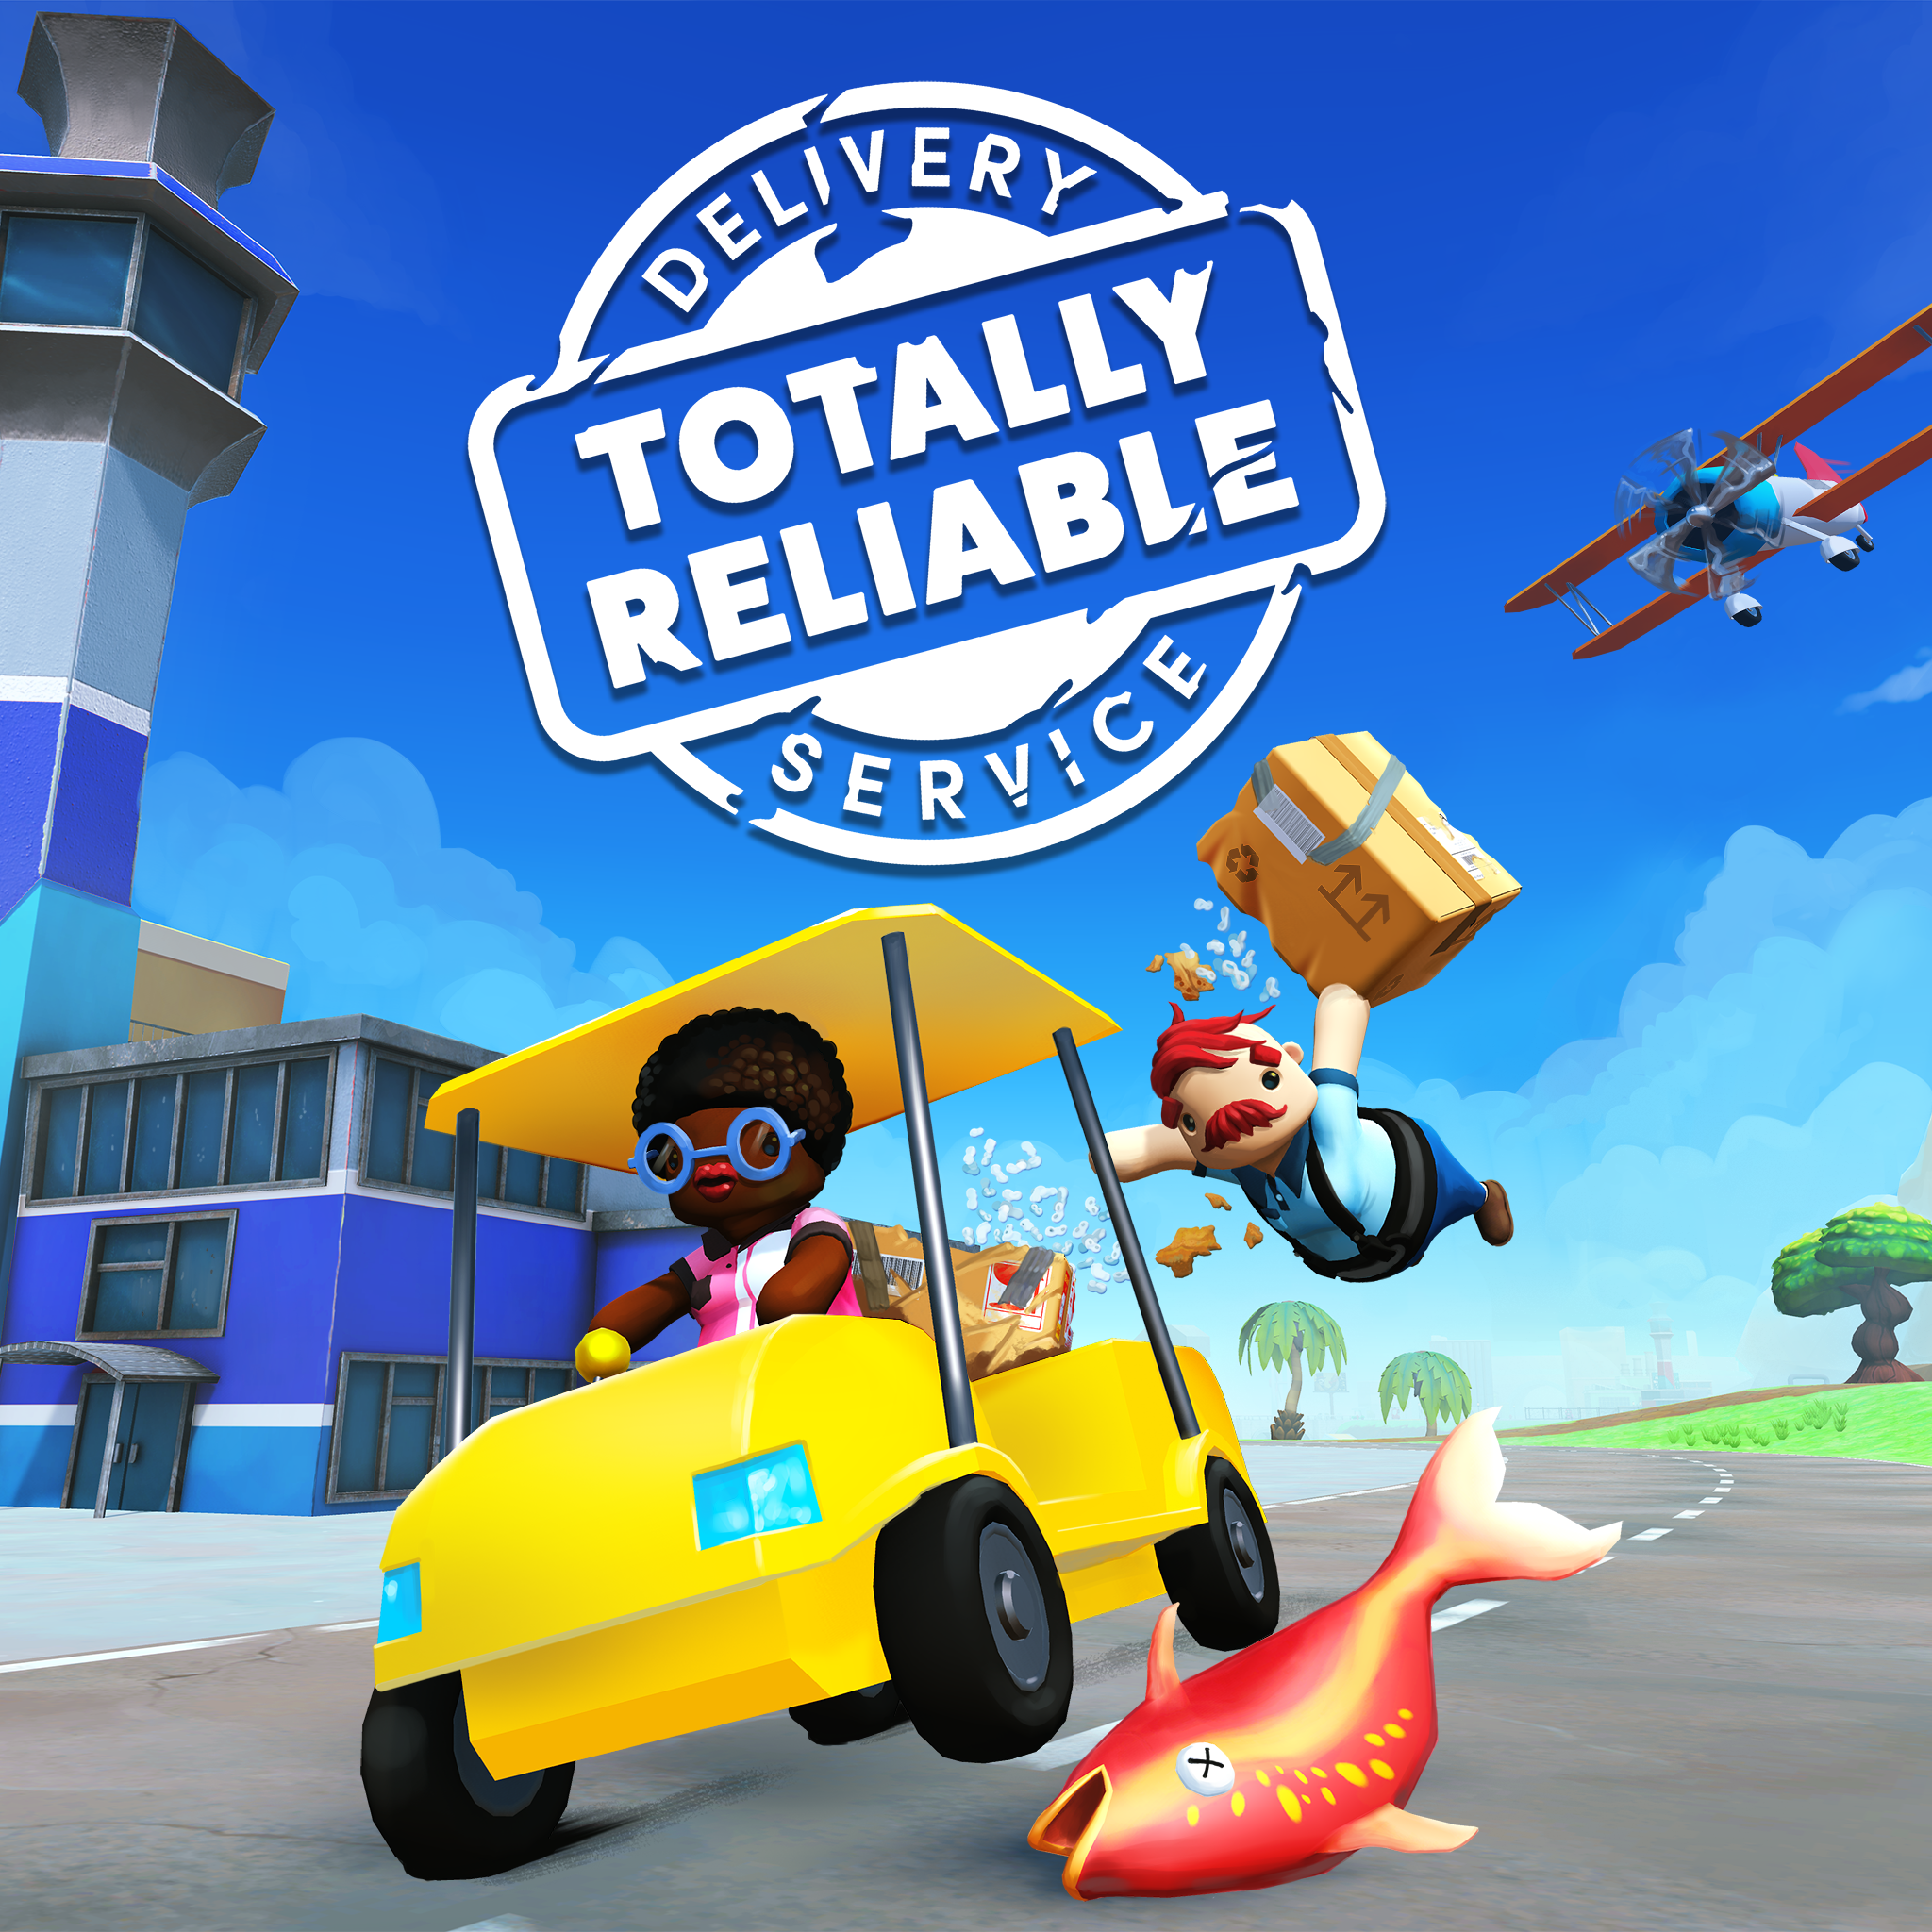 totally reliable delivery service ps4 price